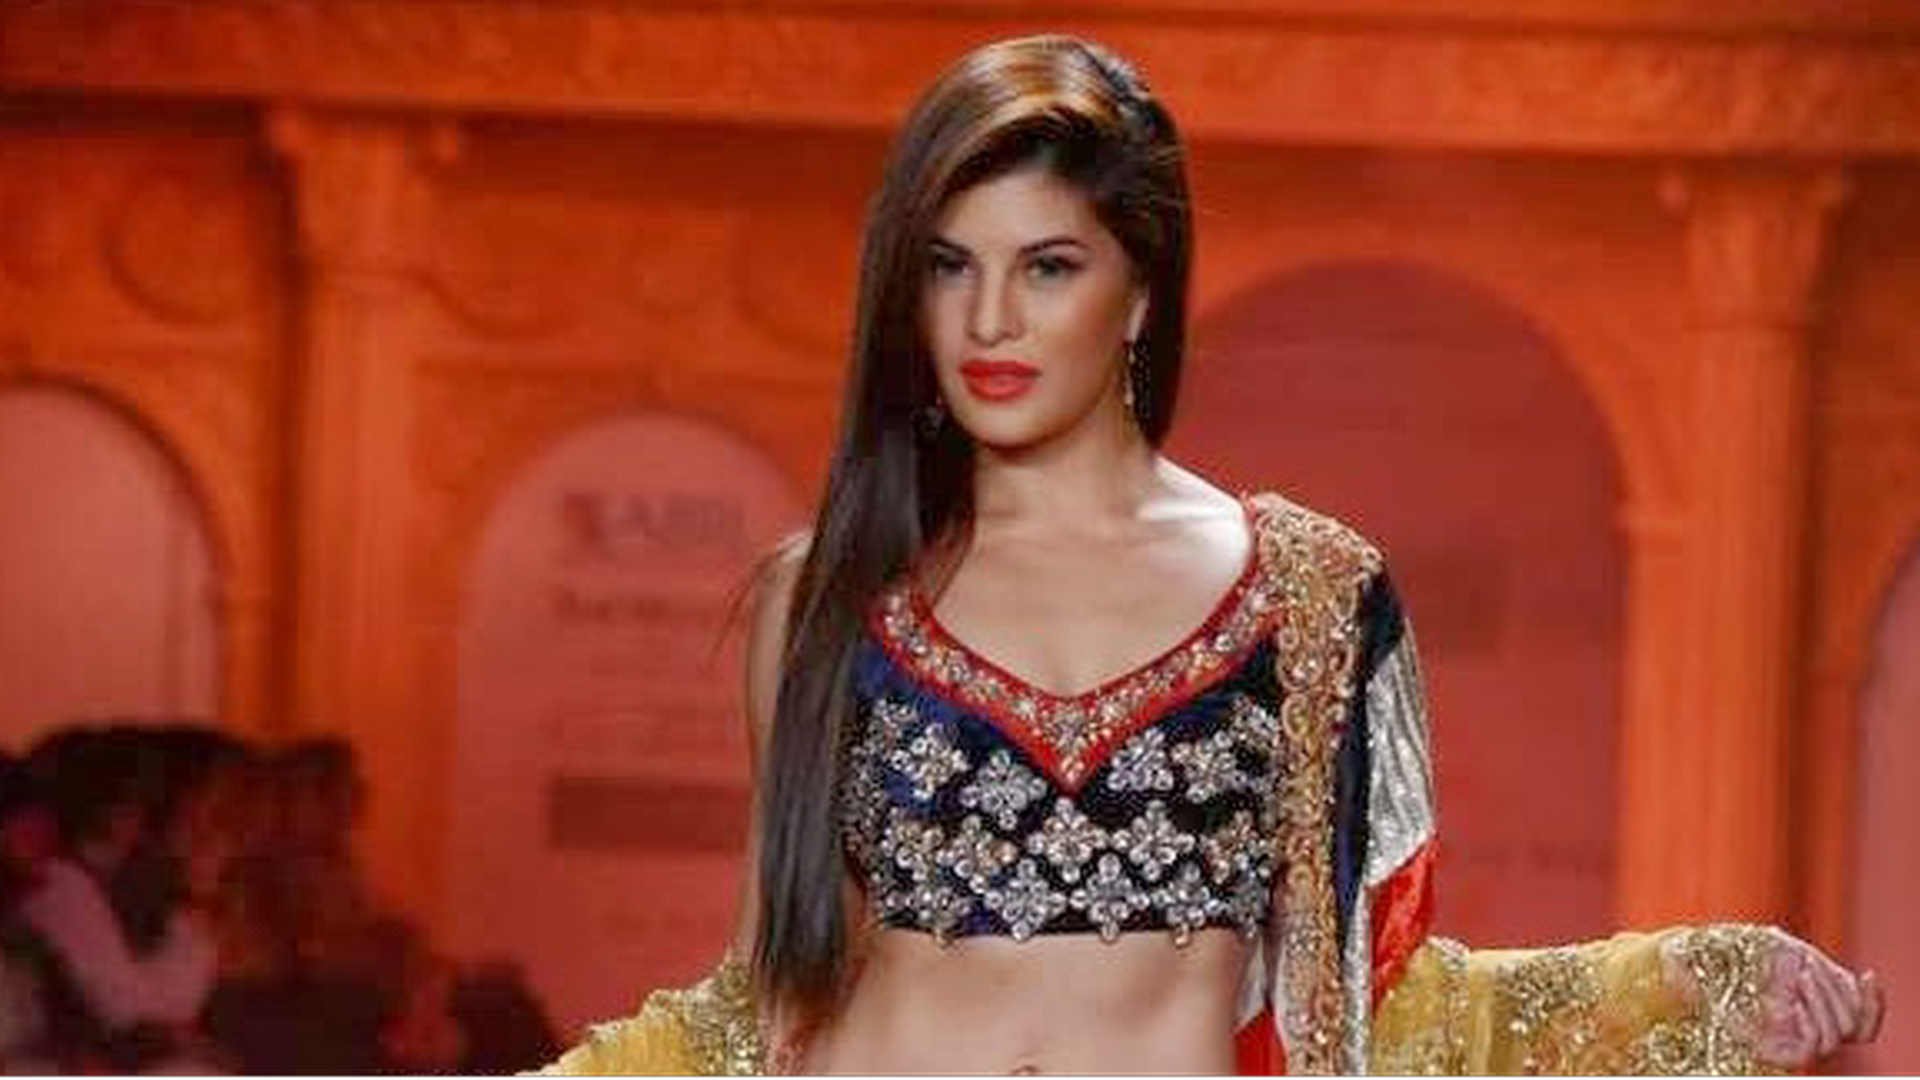 Jacqueline Fernandez is ready to take up challenging roles